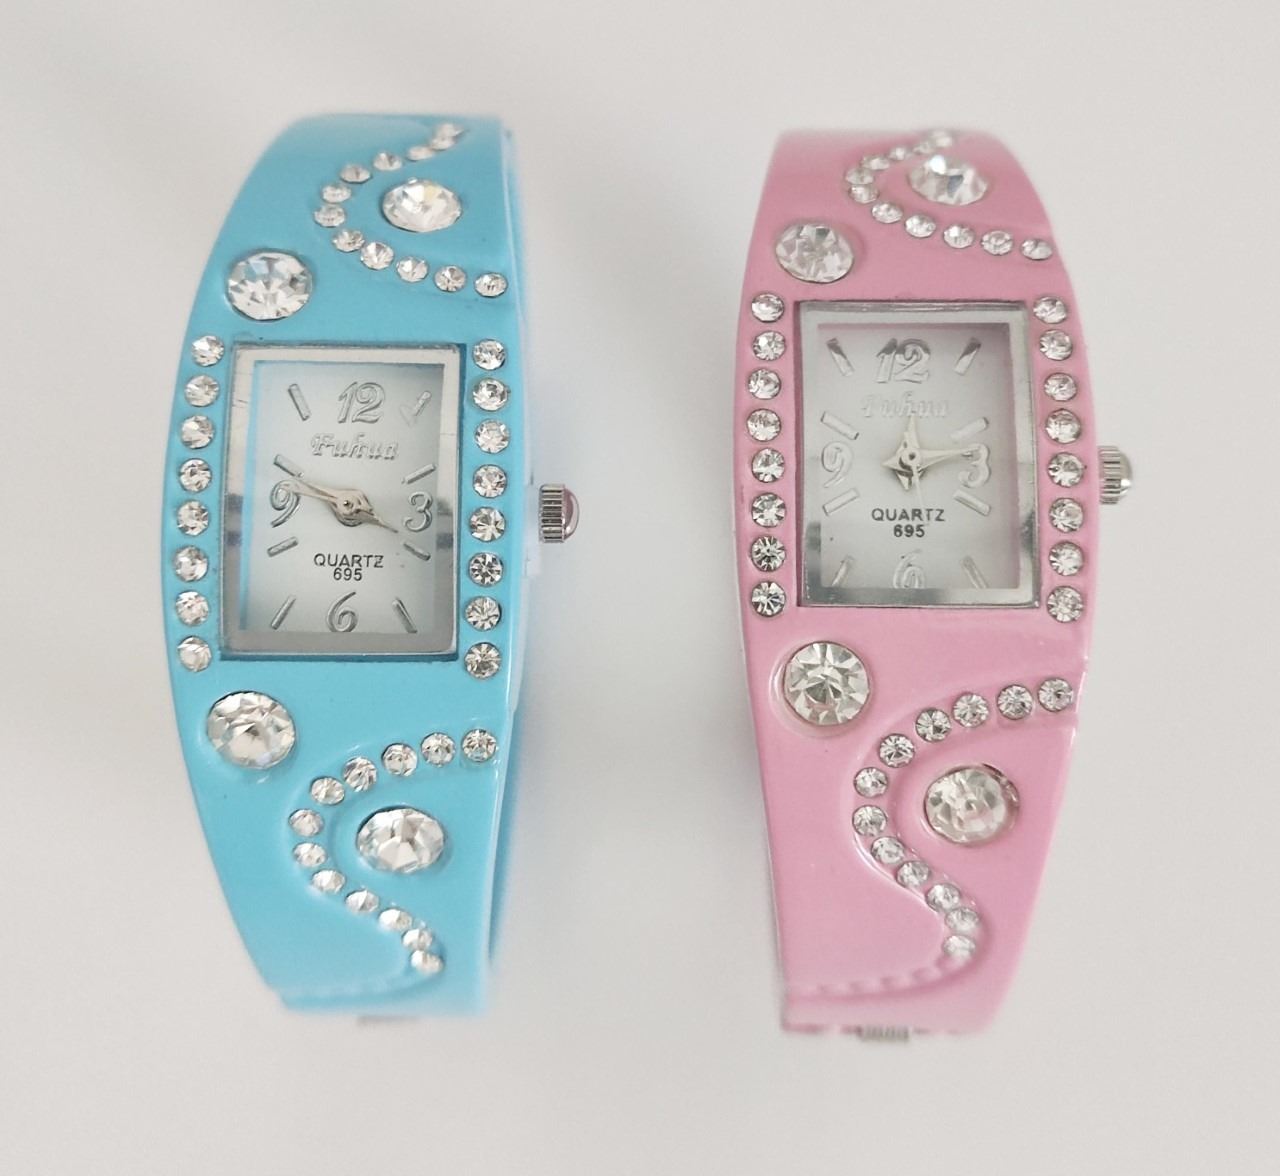 New lady's pink and blue metal watches with diamante quartz crystals together with gold plated box